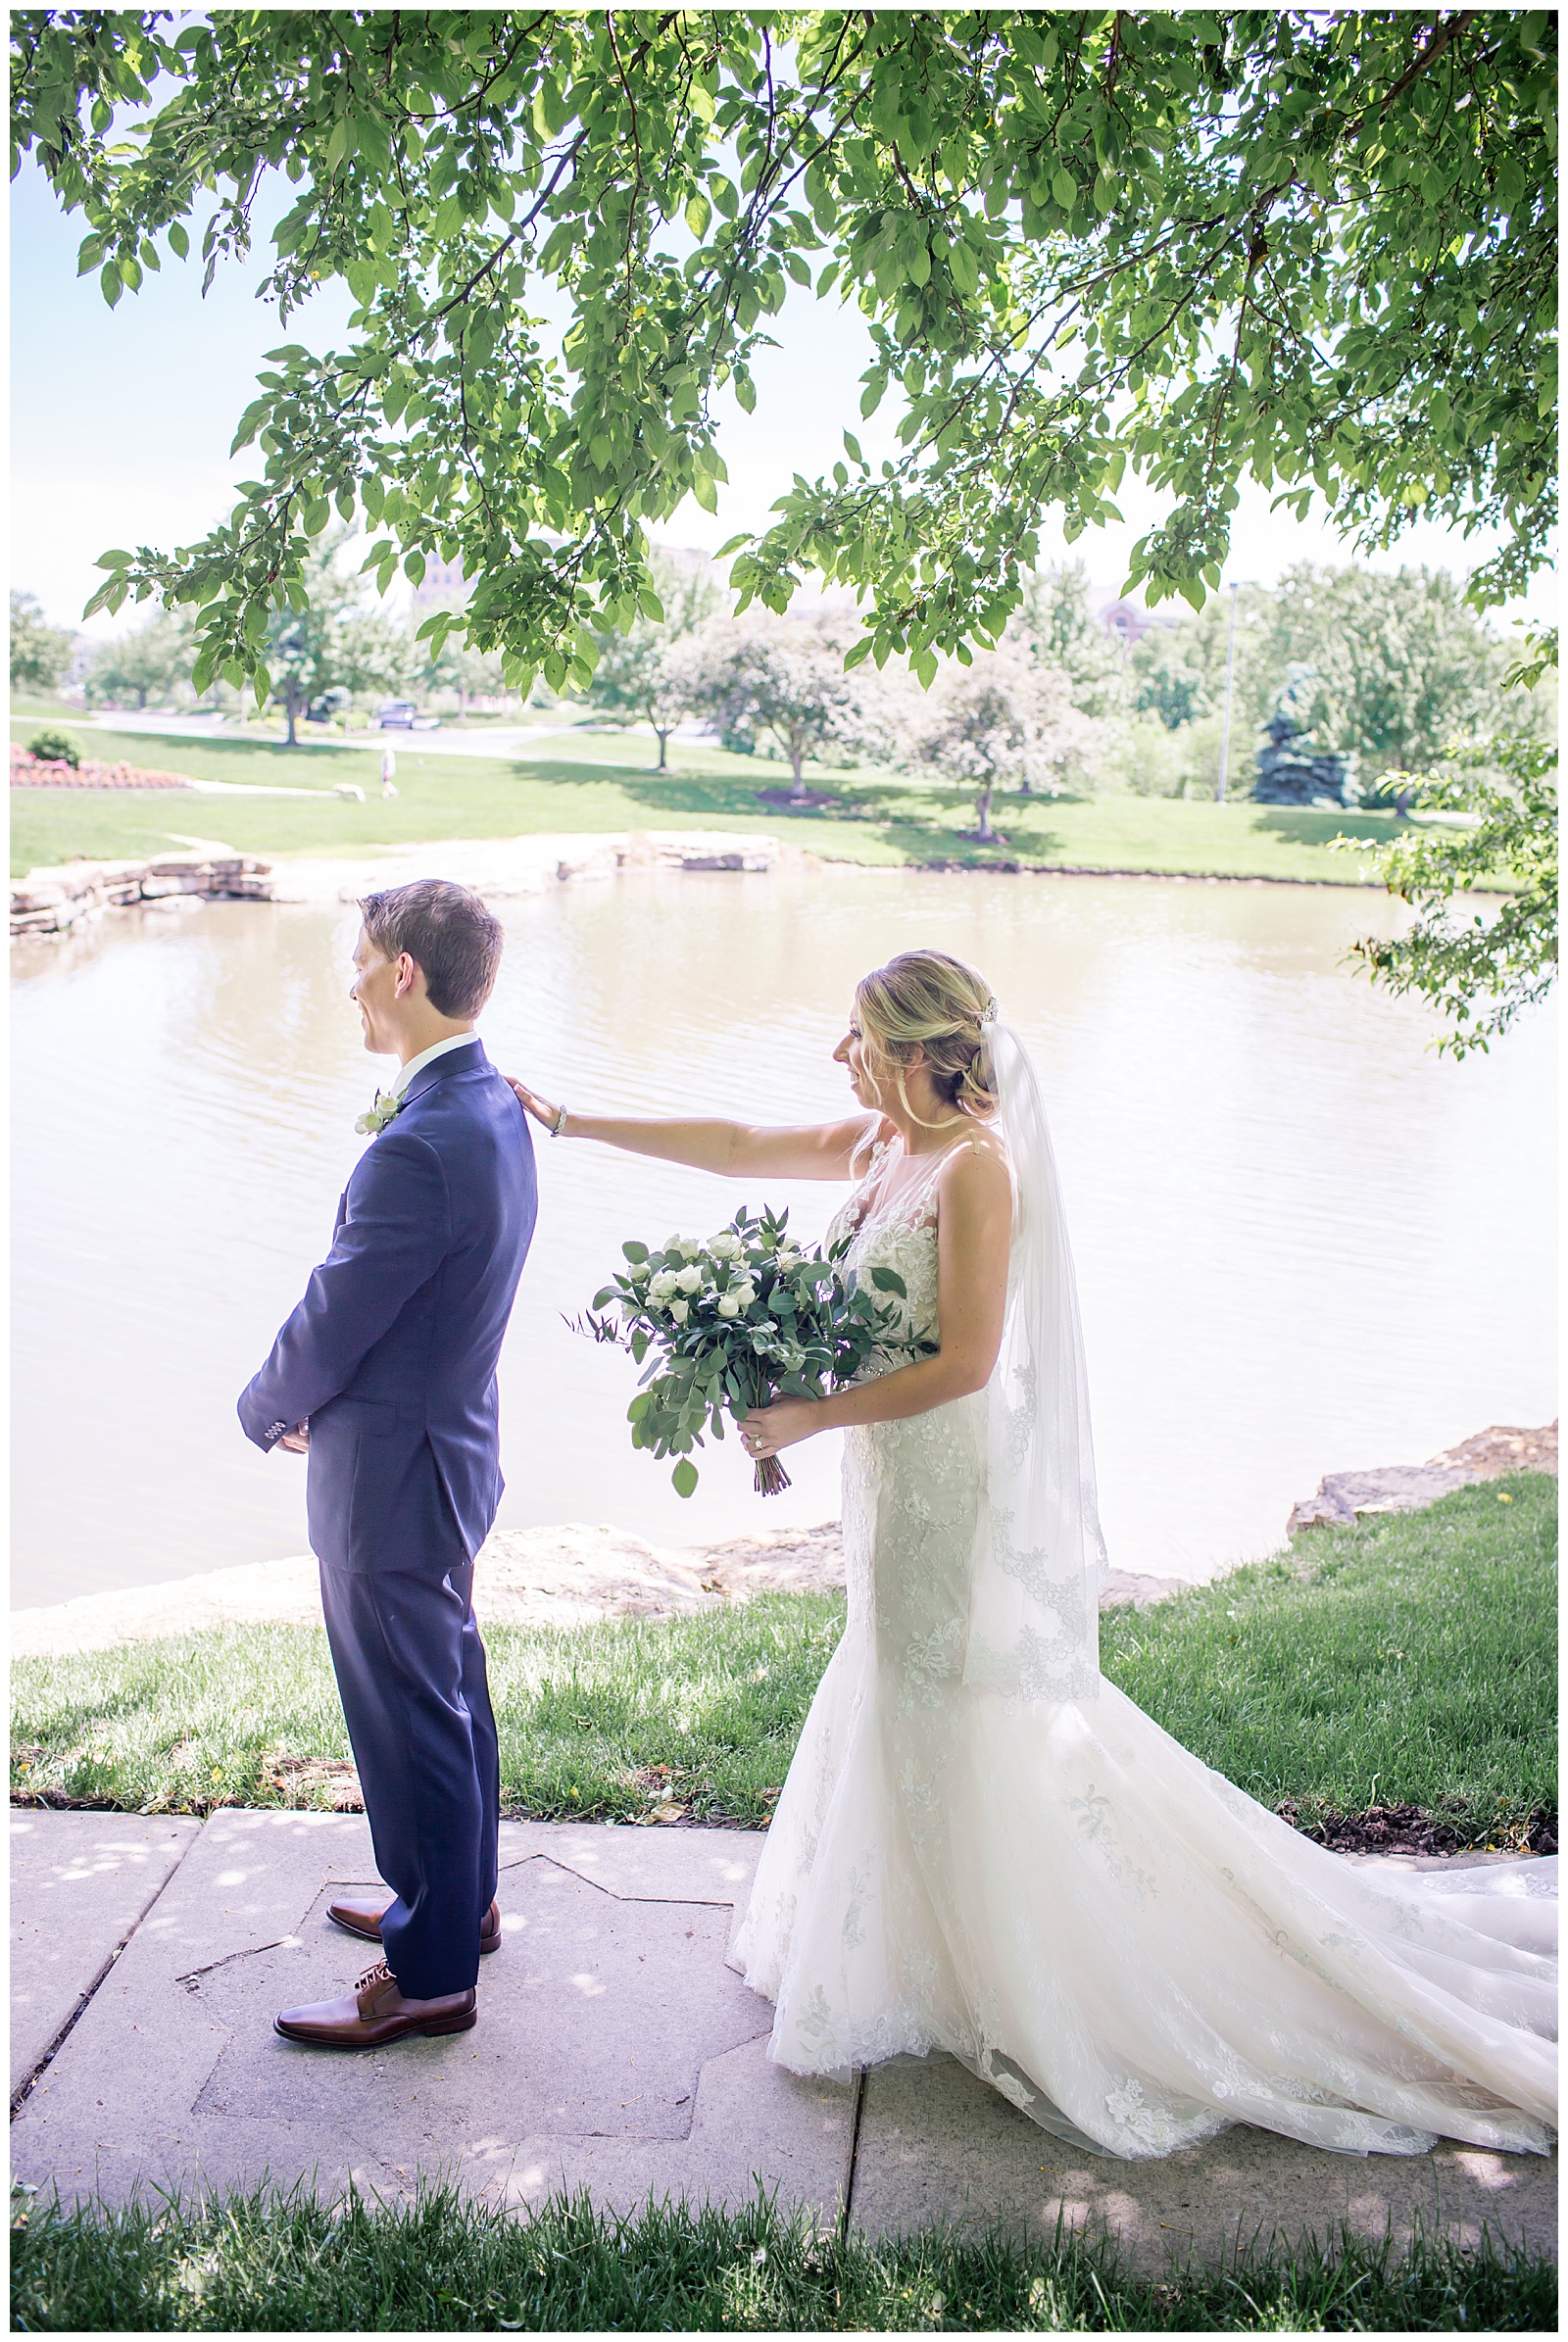 Wedding photography and videography by Kansas City wedding photographers Wisdom-Watson Weddings.